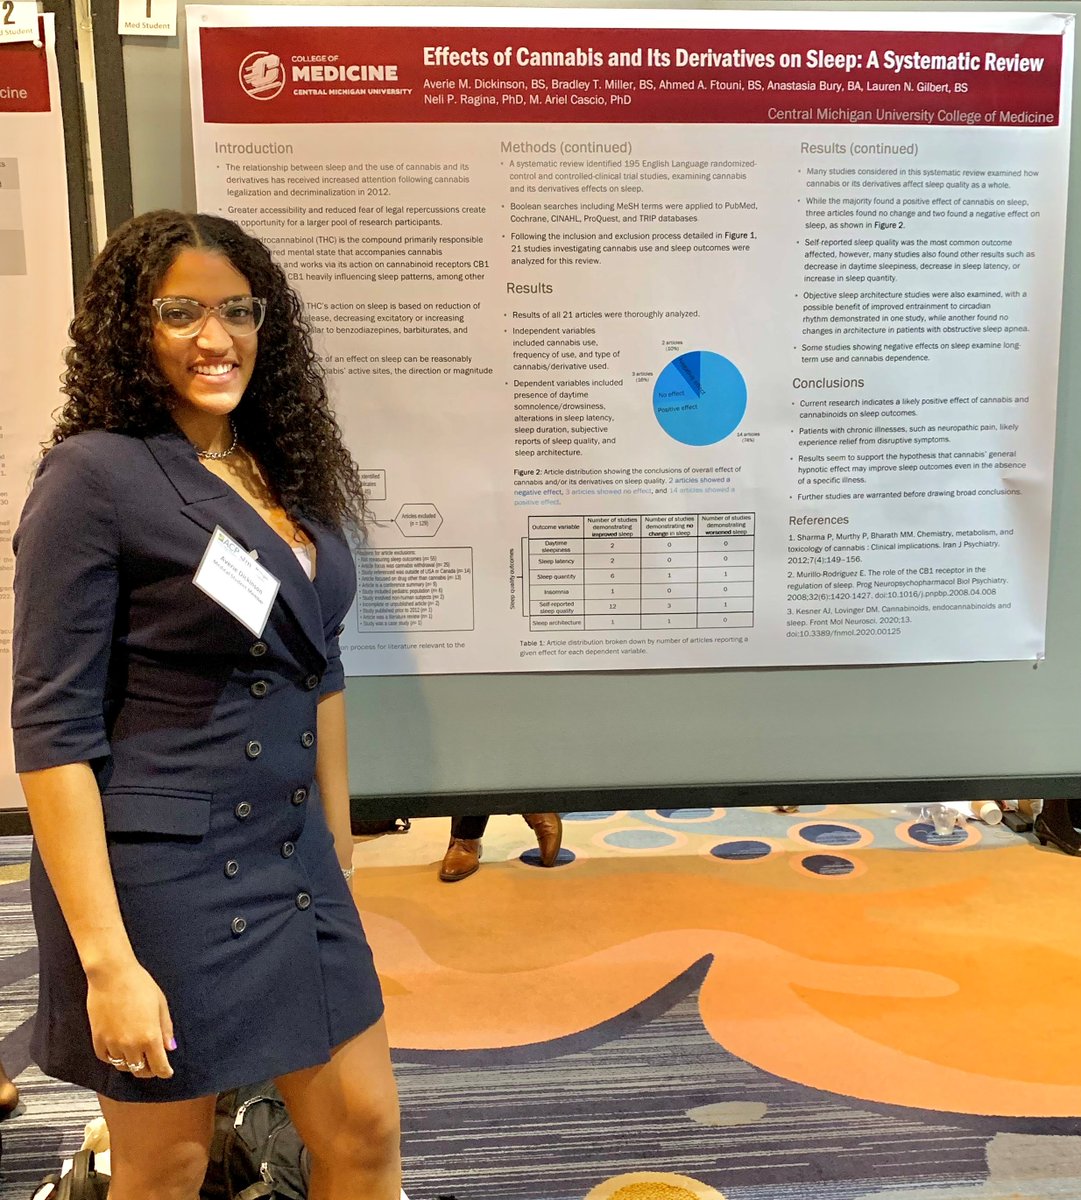 Had a great time at ACP Michigan presenting my research poster and meeting so many amazing physicians and aspiring IM physicians, like myself! Very grateful for this experience😀 @MIChapterACP @CMU_Medicine #MedTwitter